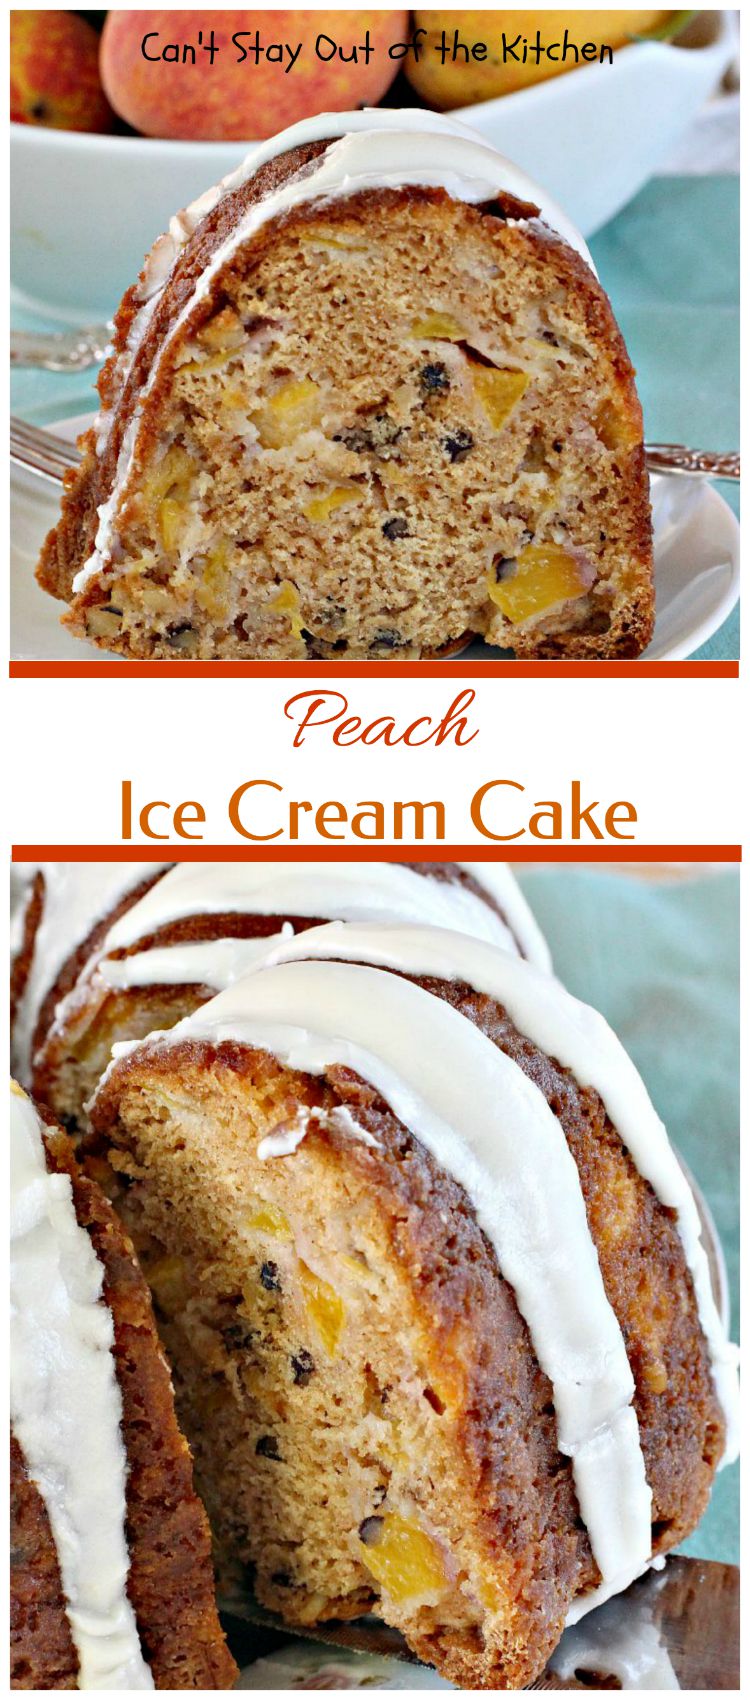 Peach Ice Cream Cake | Can't Stay Out of the Kitchen | one of the most spectacular #cakes you will ever eat! The surprise ingredient is #icecream! #peaches #dessert